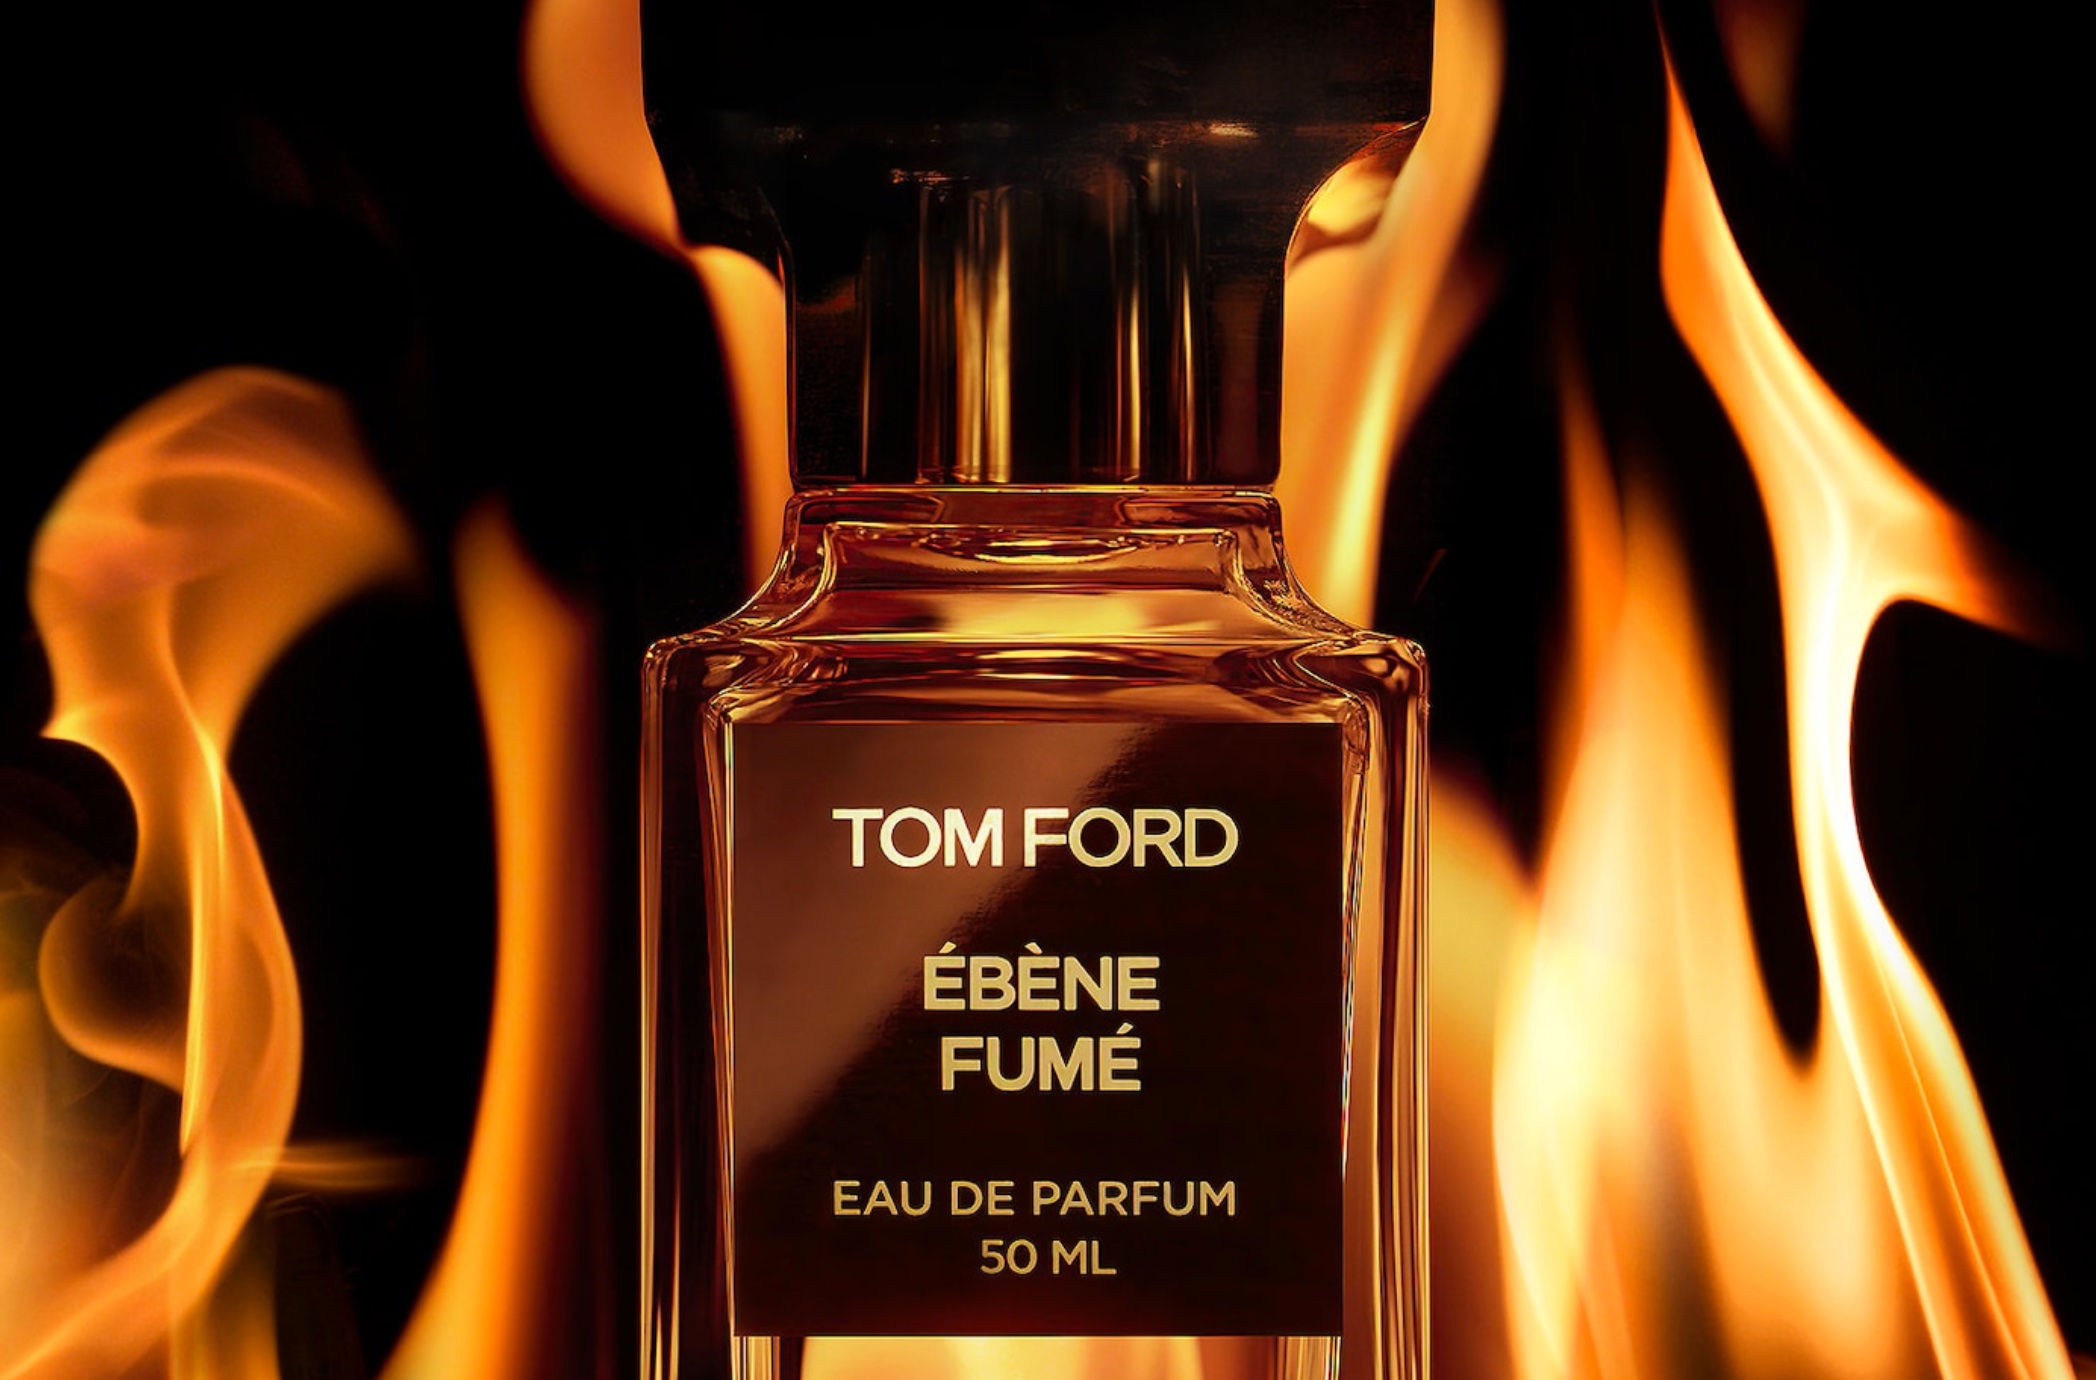 Best new cologne to gift his holiday season Hermes, Tom Ford 9to5Toys